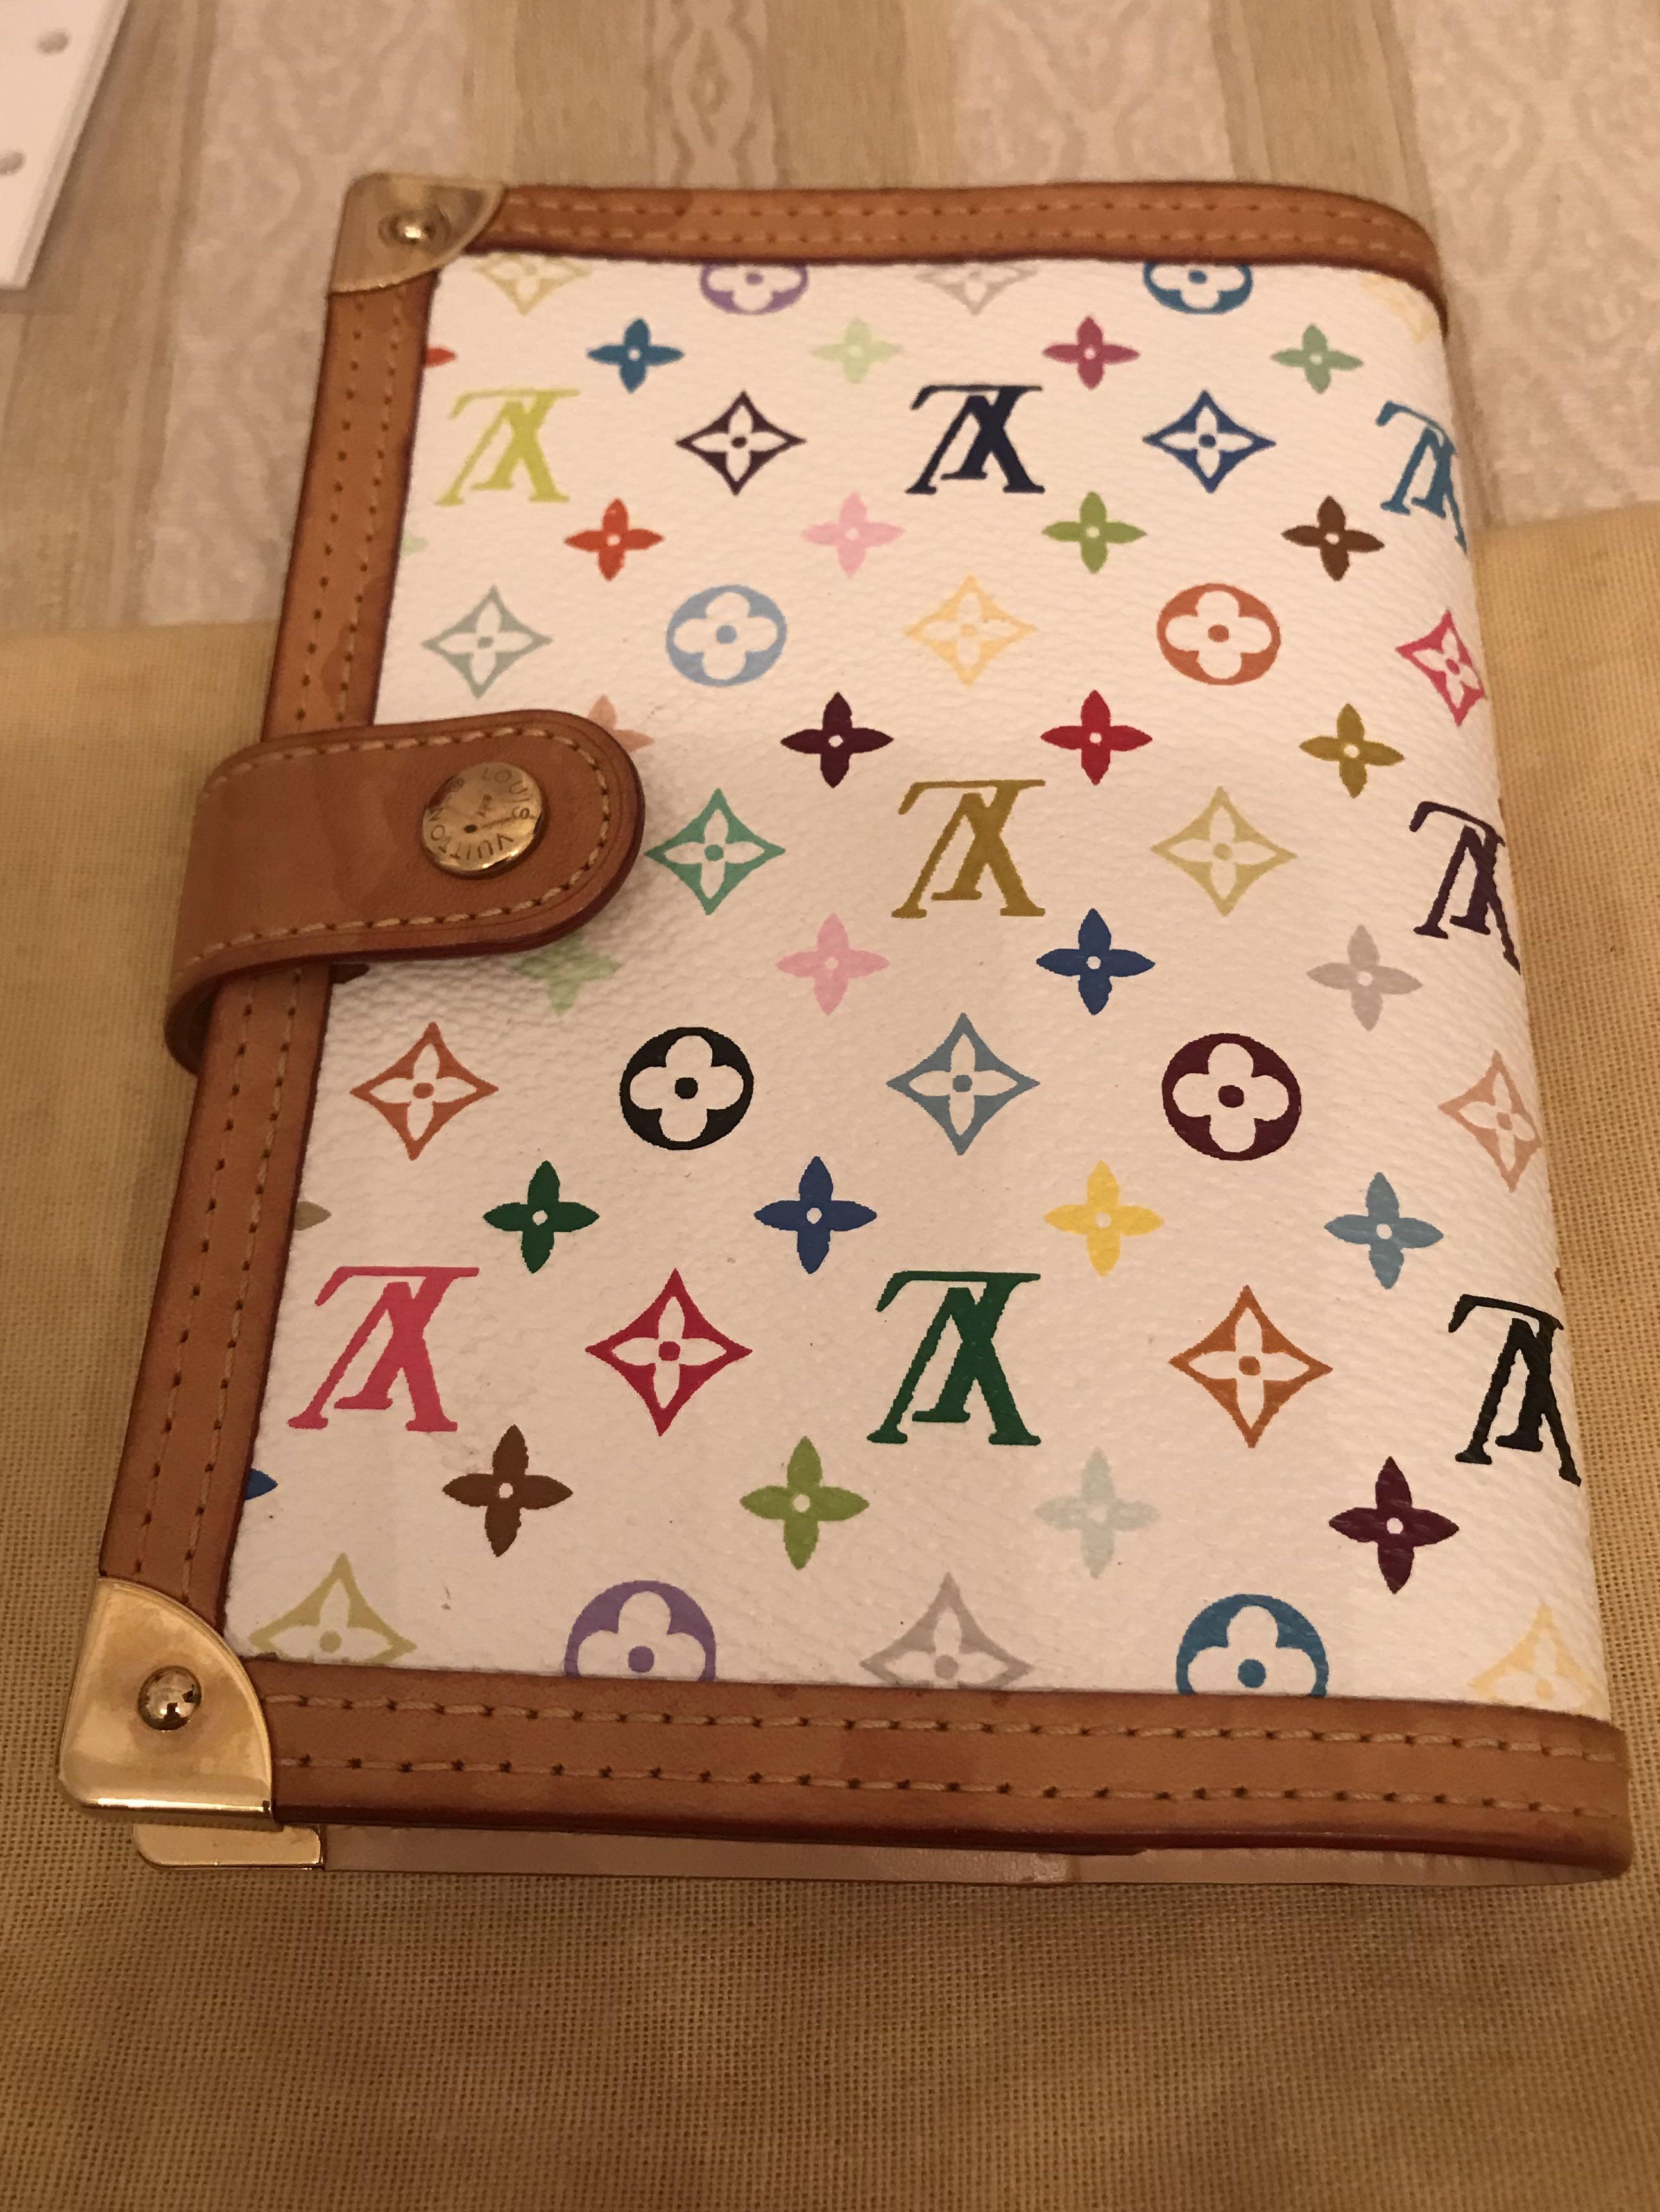 Shop Louis Vuitton MONOGRAM Small ring agenda cover (R20005) by SkyNS